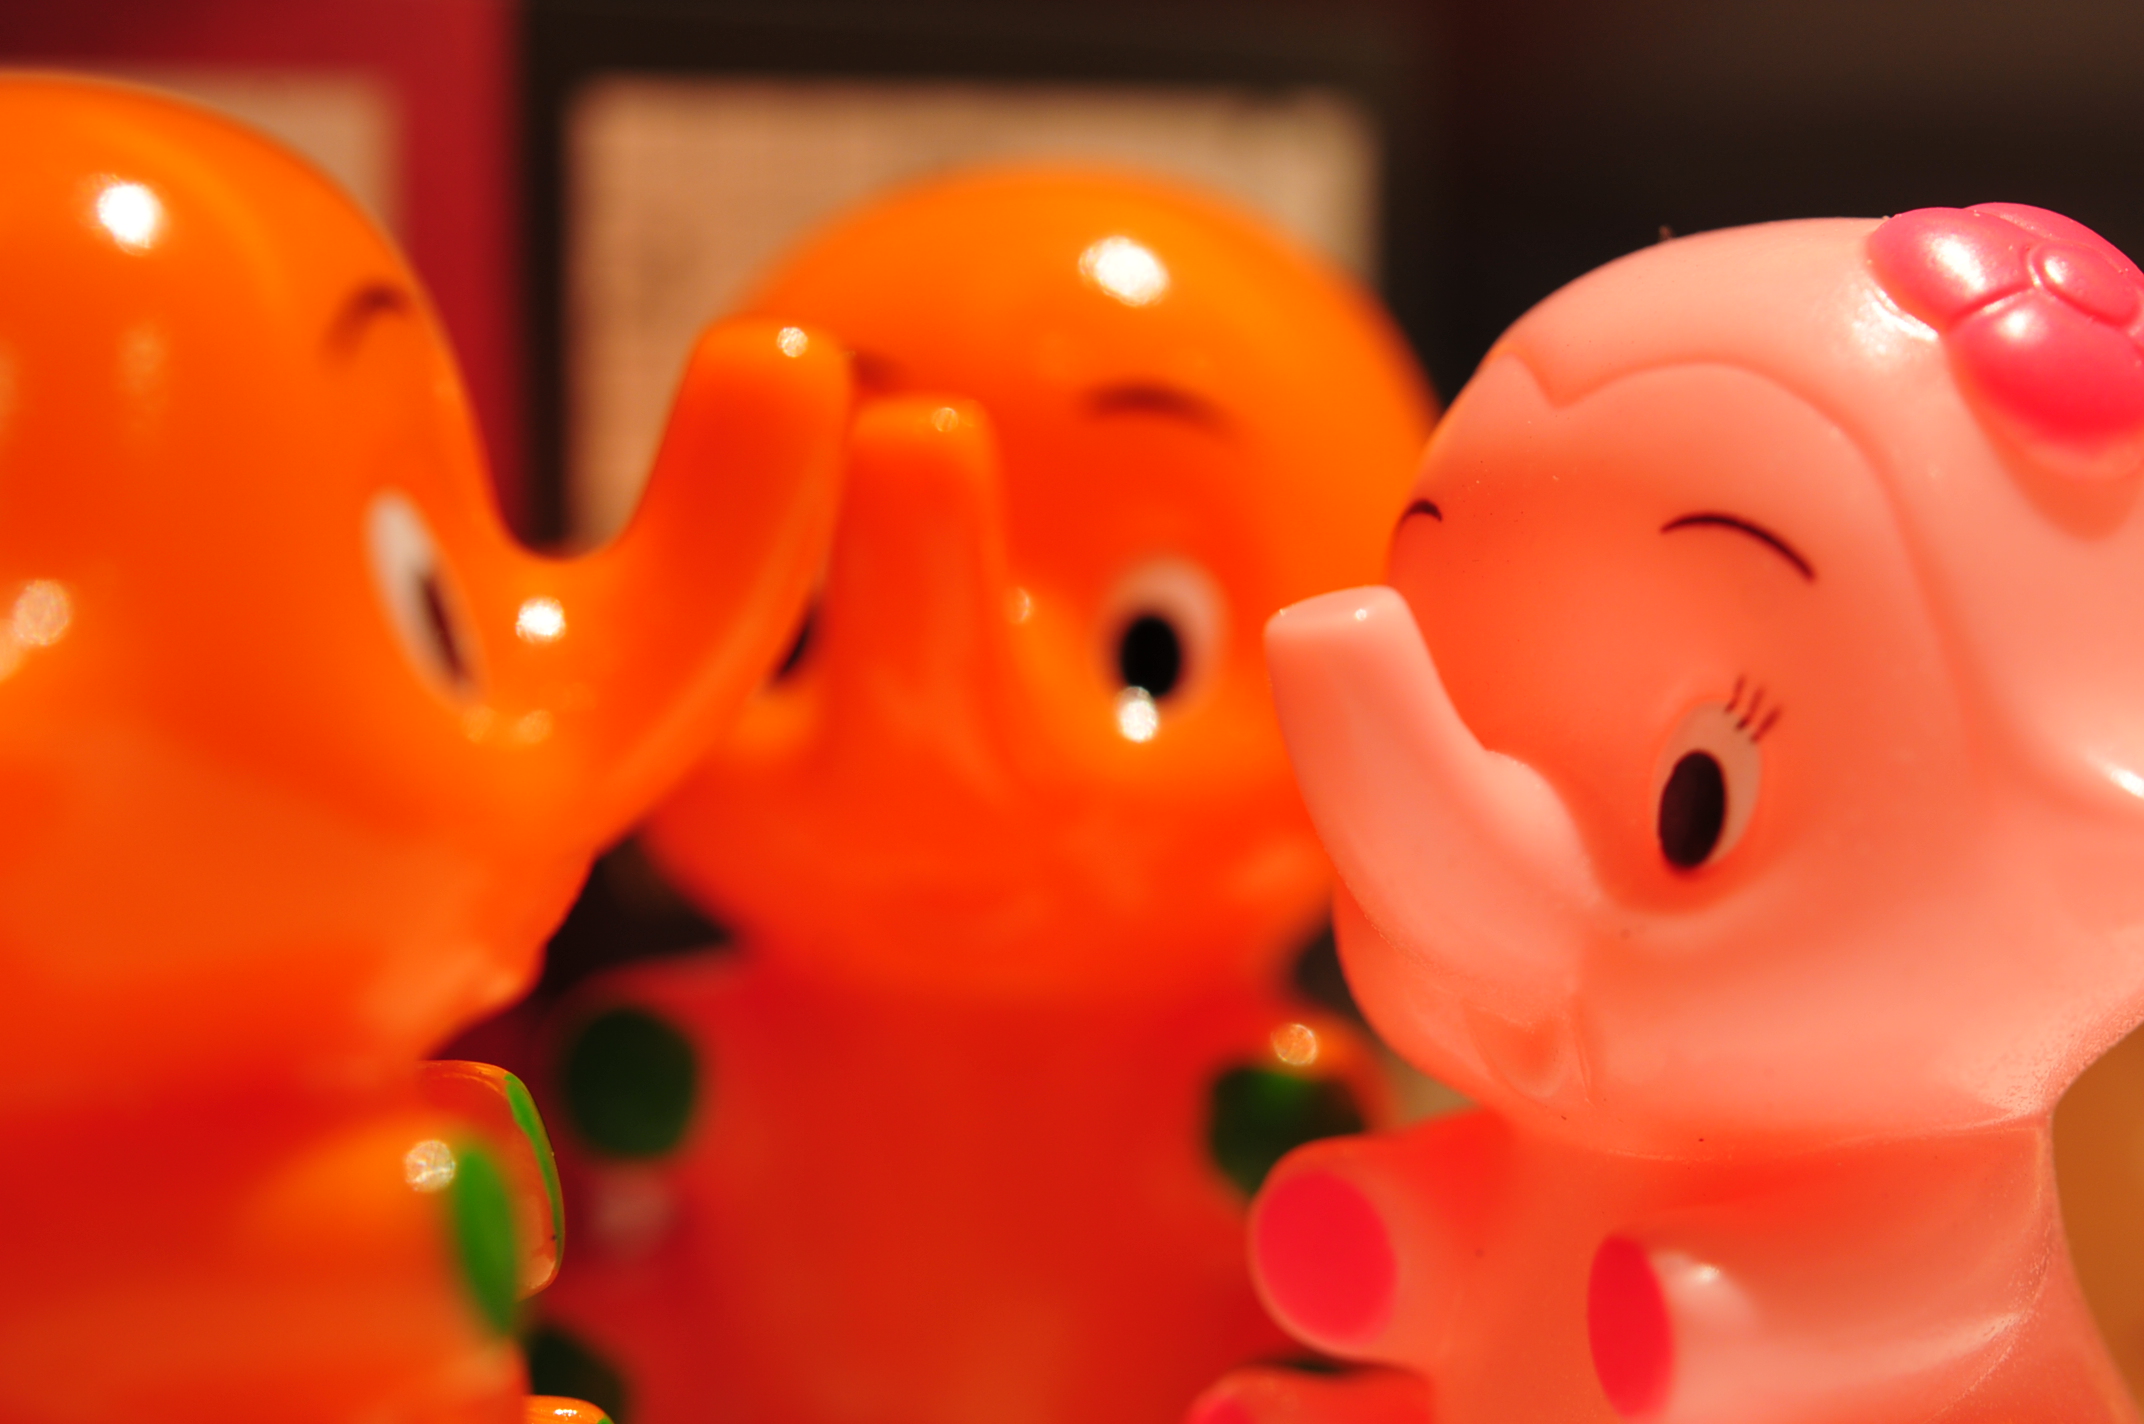 two pink and orange elephants are shown close together